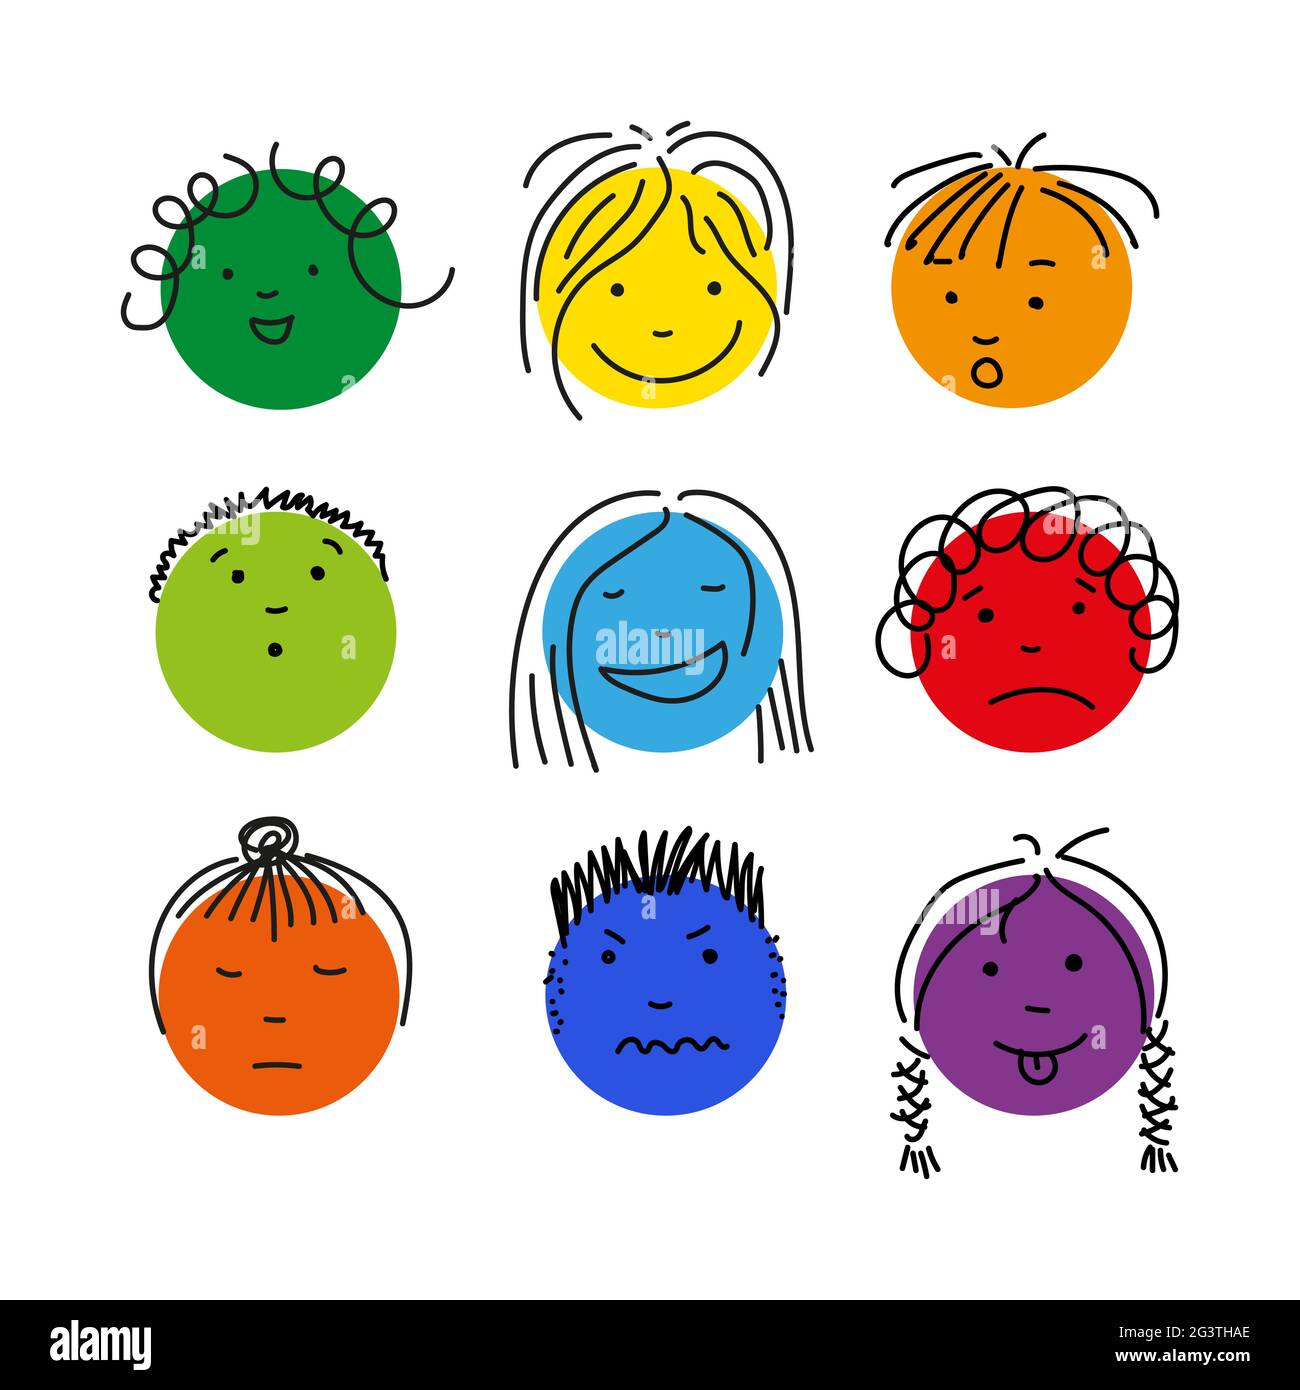 feelings and emotions clipart